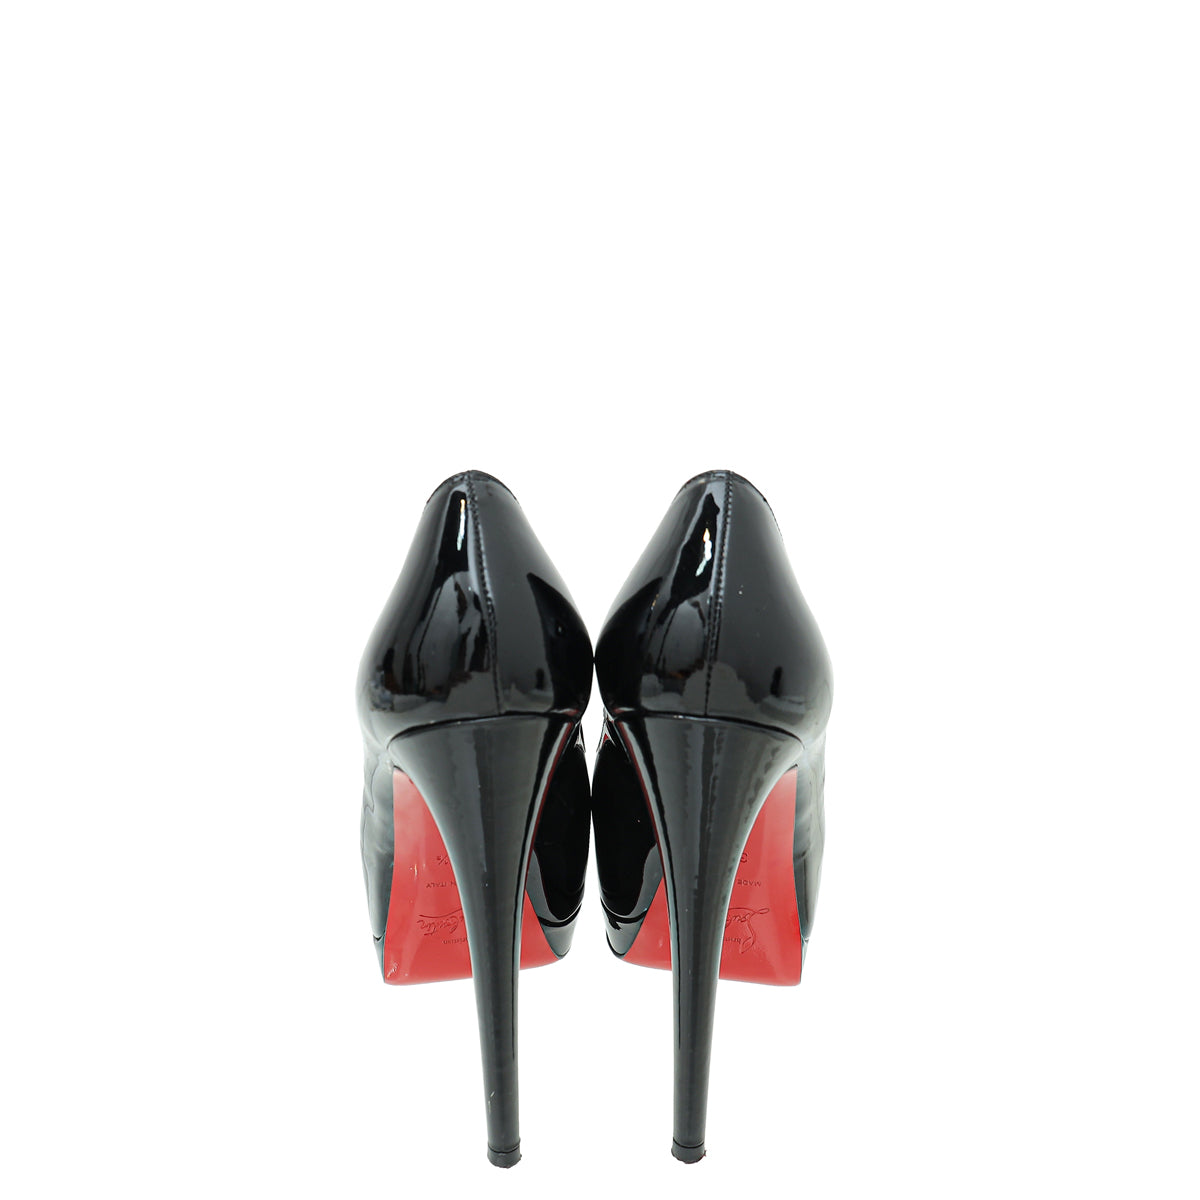 Christian Louboutin Lady Peep patent leather Red Heel Pumps Black